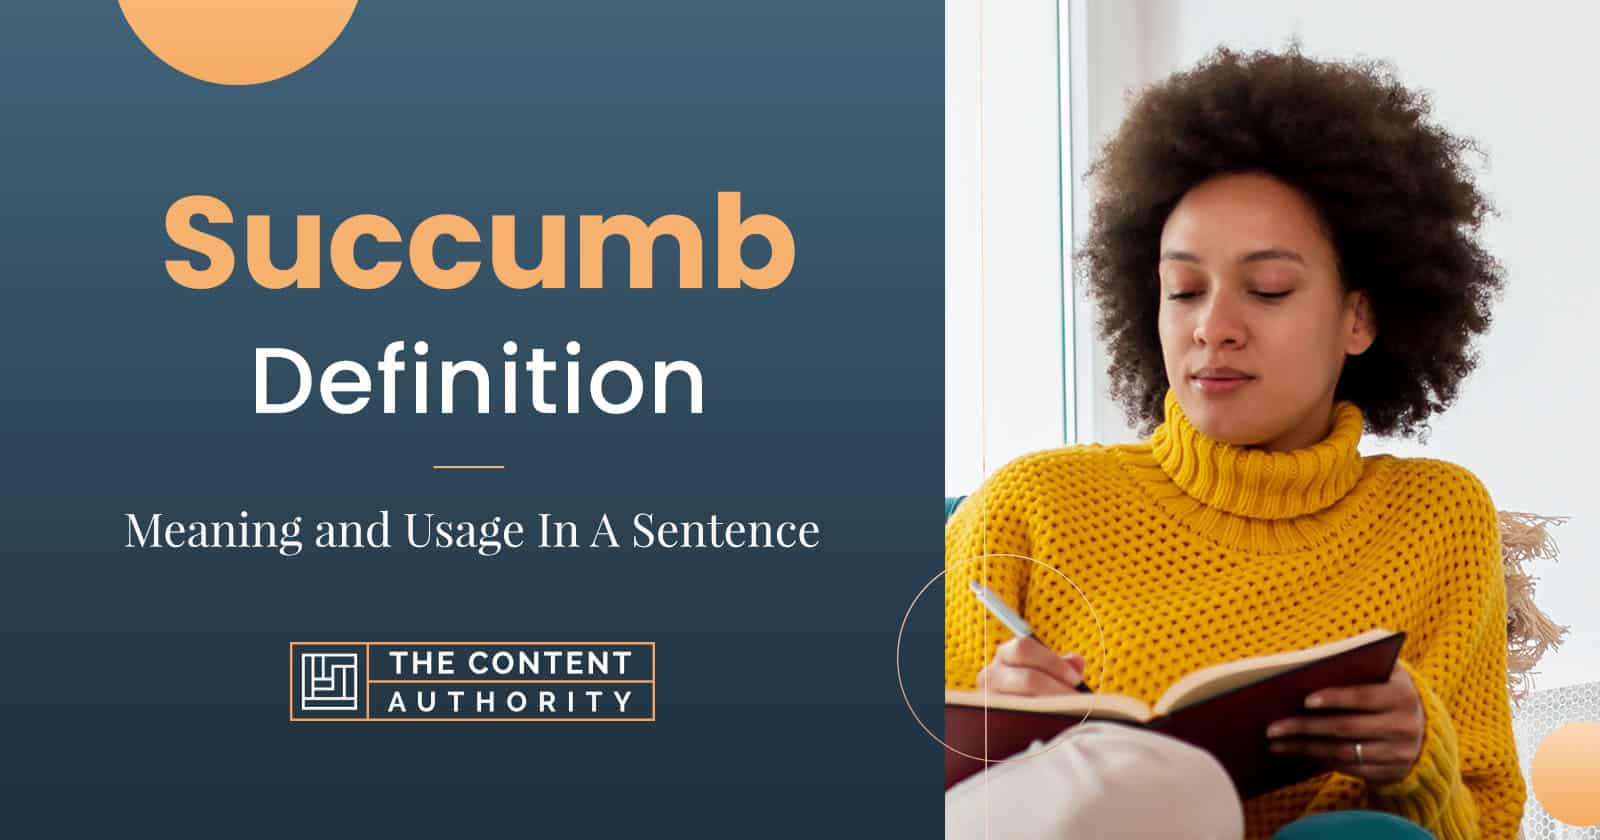 Succumb Definition – Meaning and Usage In A Sentence